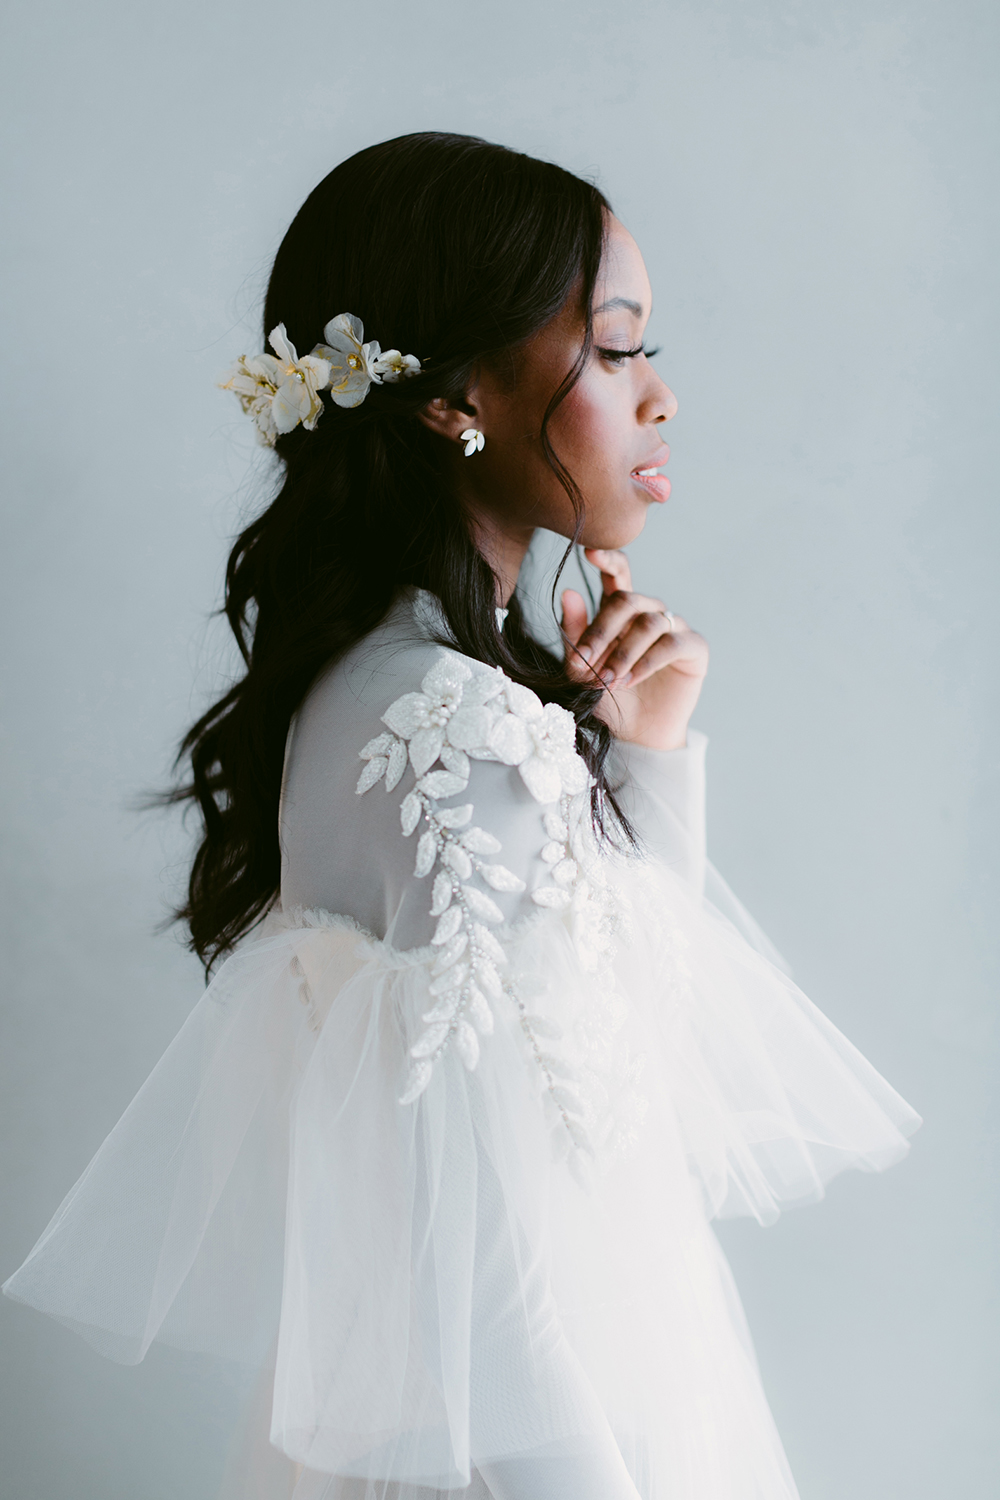 New spring bridal collection by A-list member Hushed Commotion